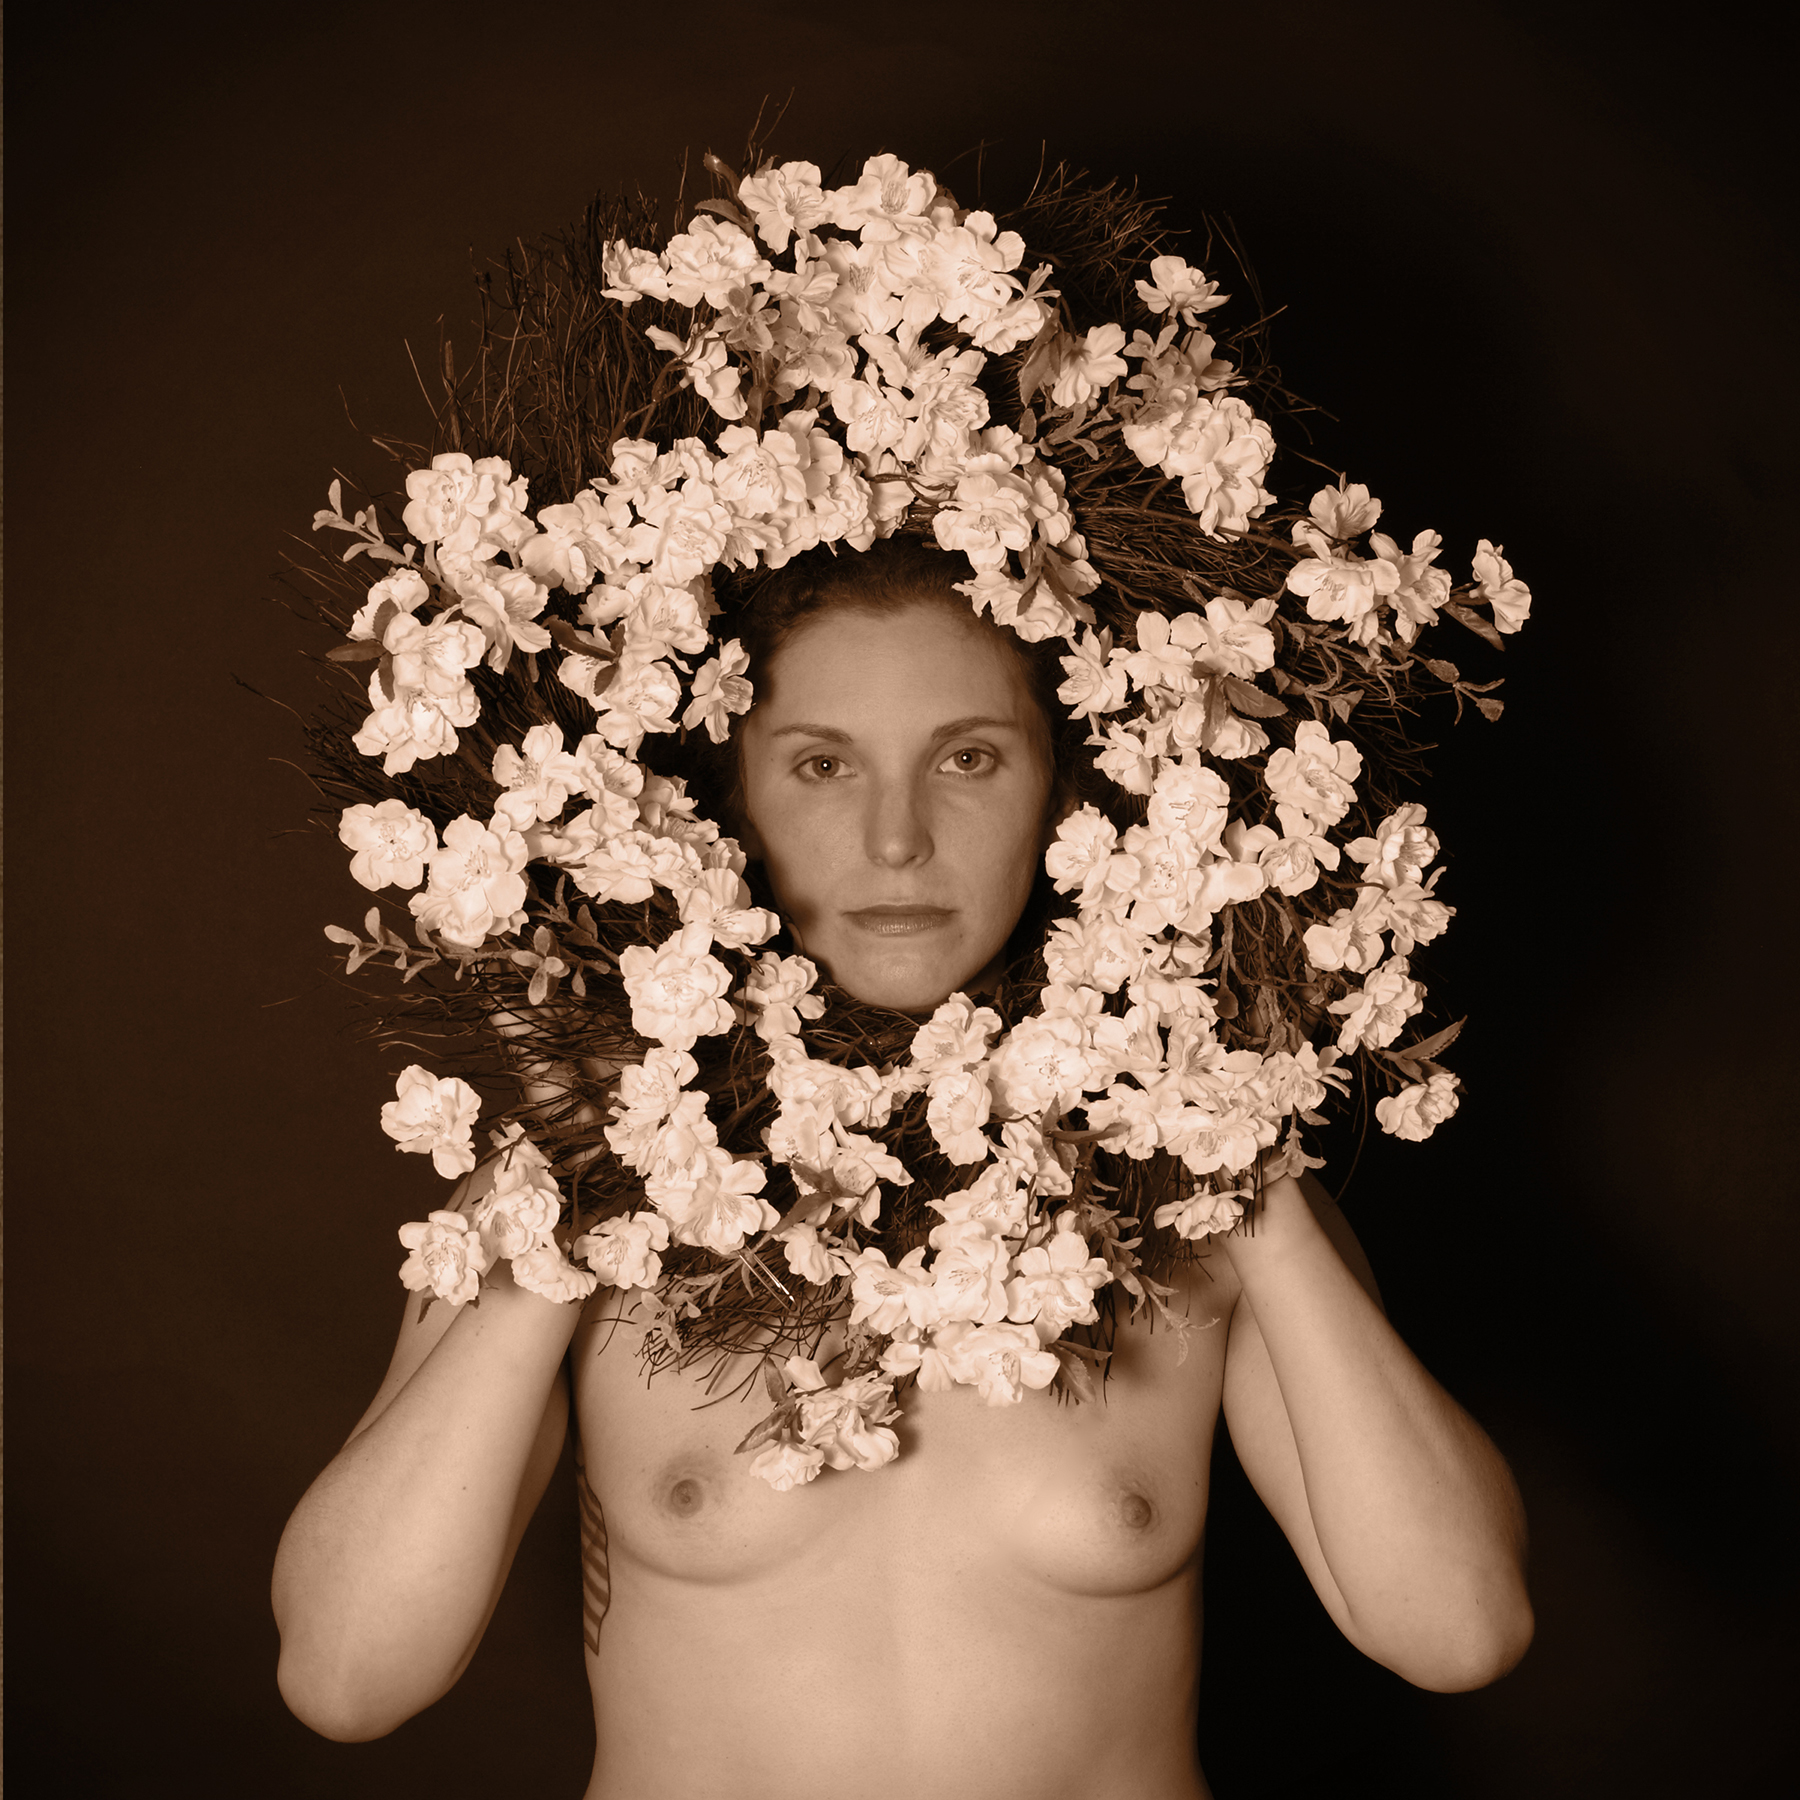 Nude woman with flower wreath around here face